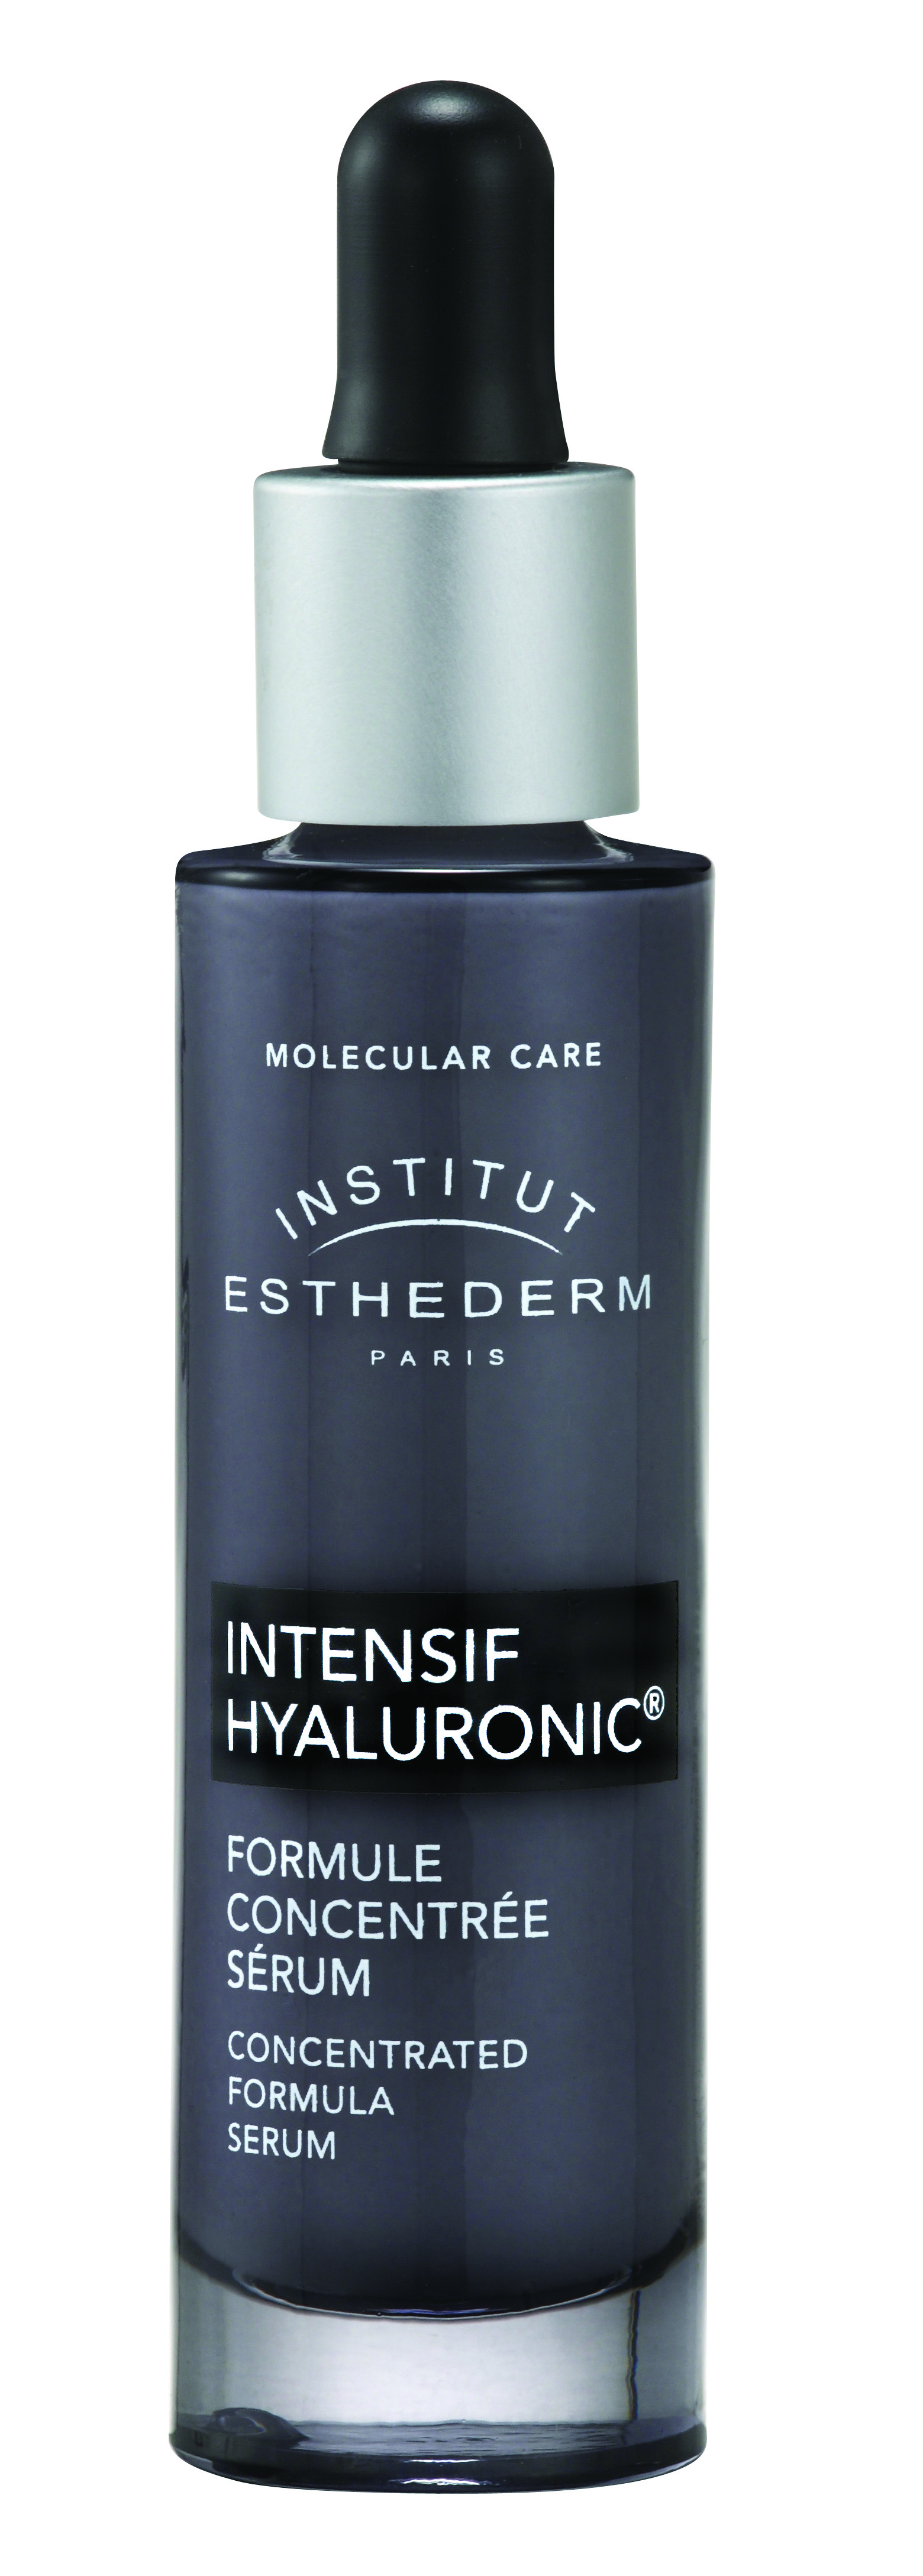 Intensif Hyaluronic concentrated formula serum 